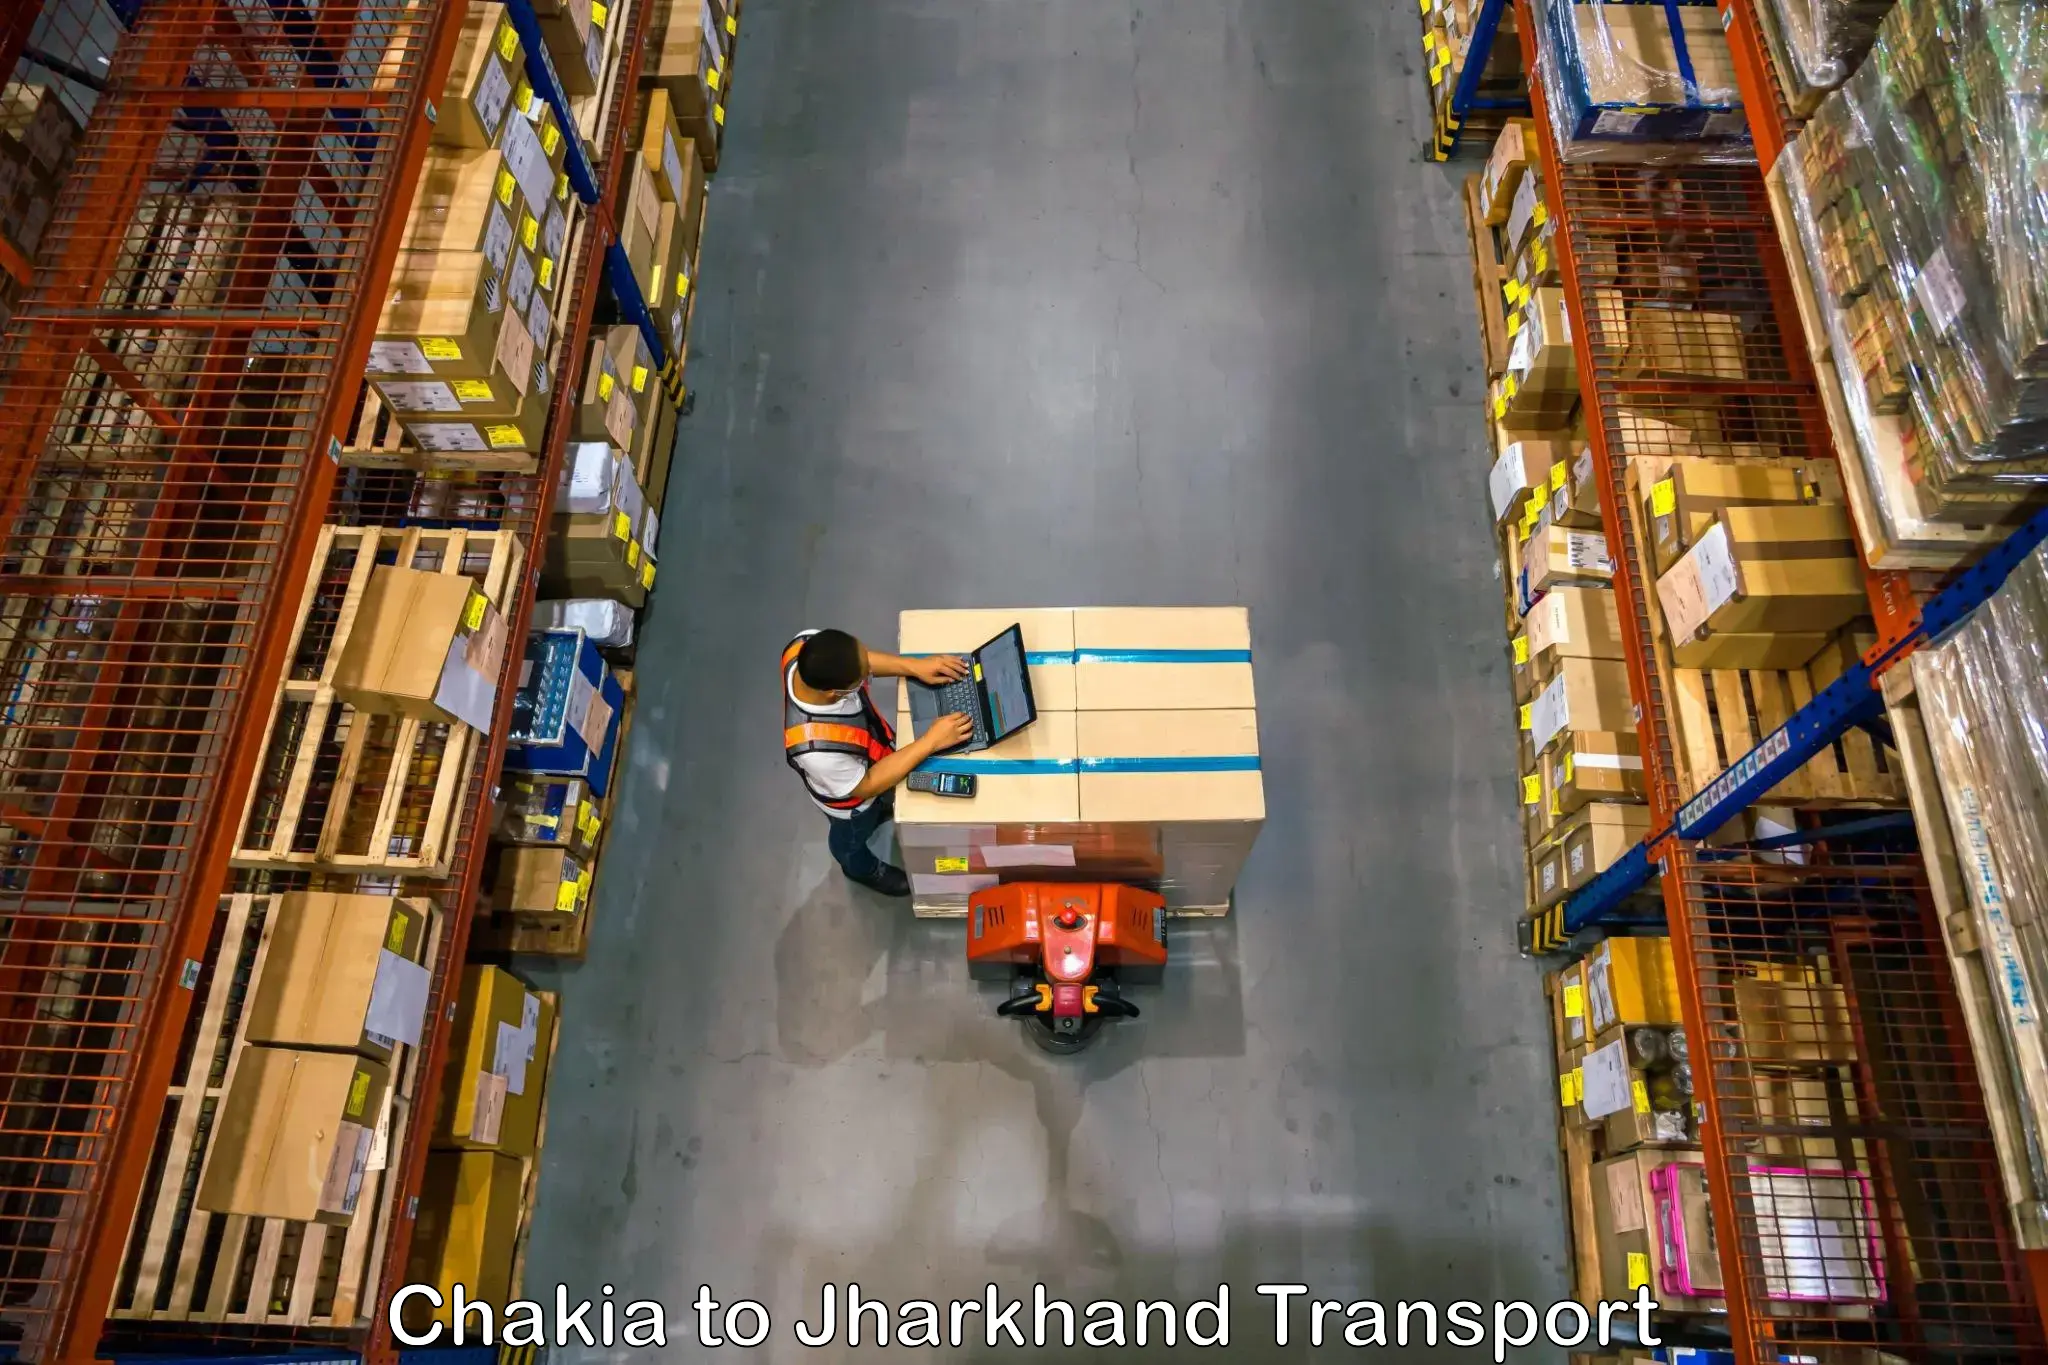 Container transport service Chakia to Jharkhand